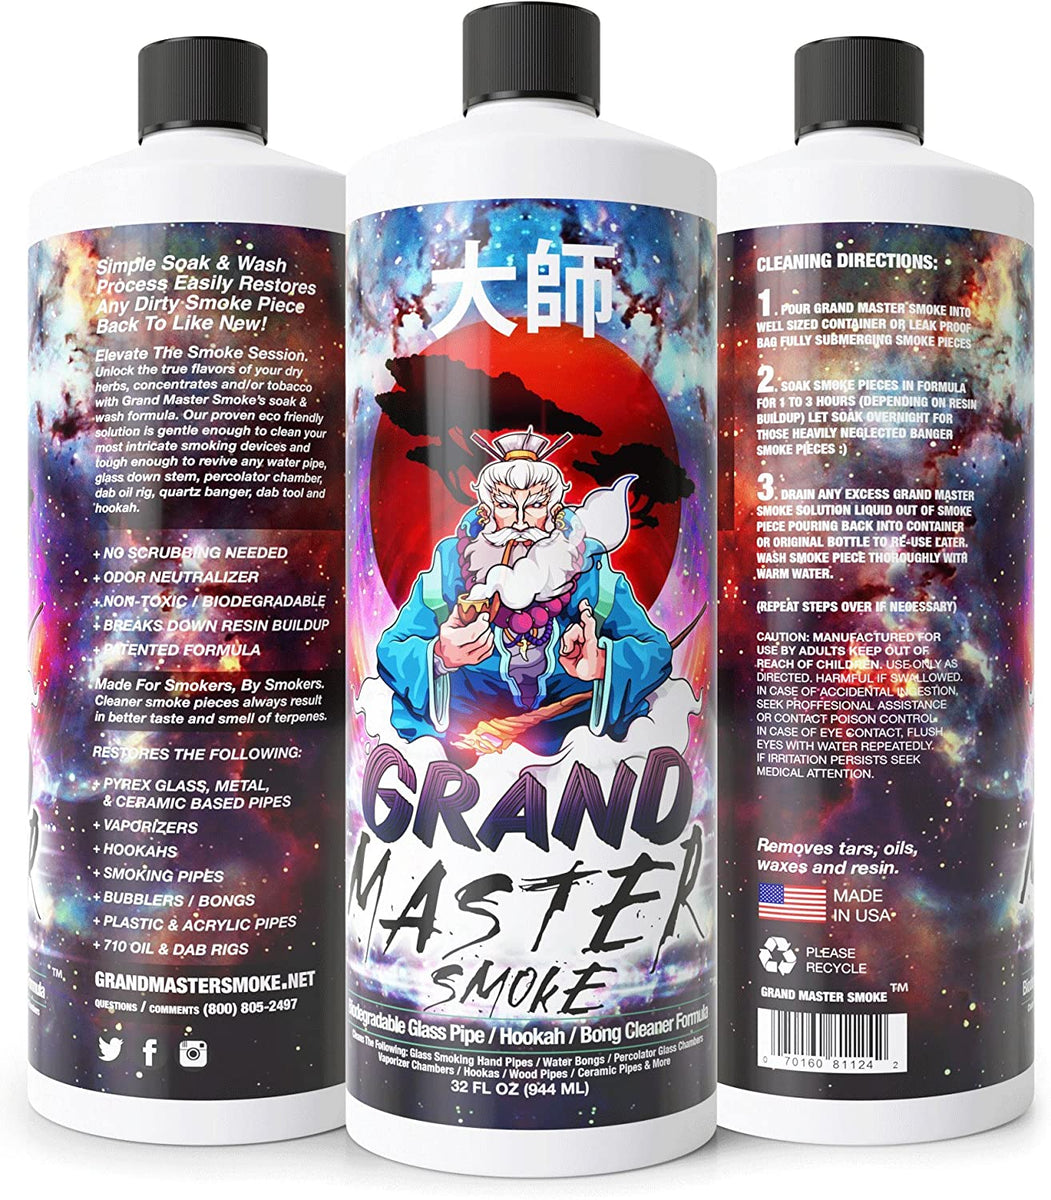 Bong Master Bong Cleaner 150 g - Bong and pipe cleaning - Bong accessories  - Head Shop - Gomoa shop